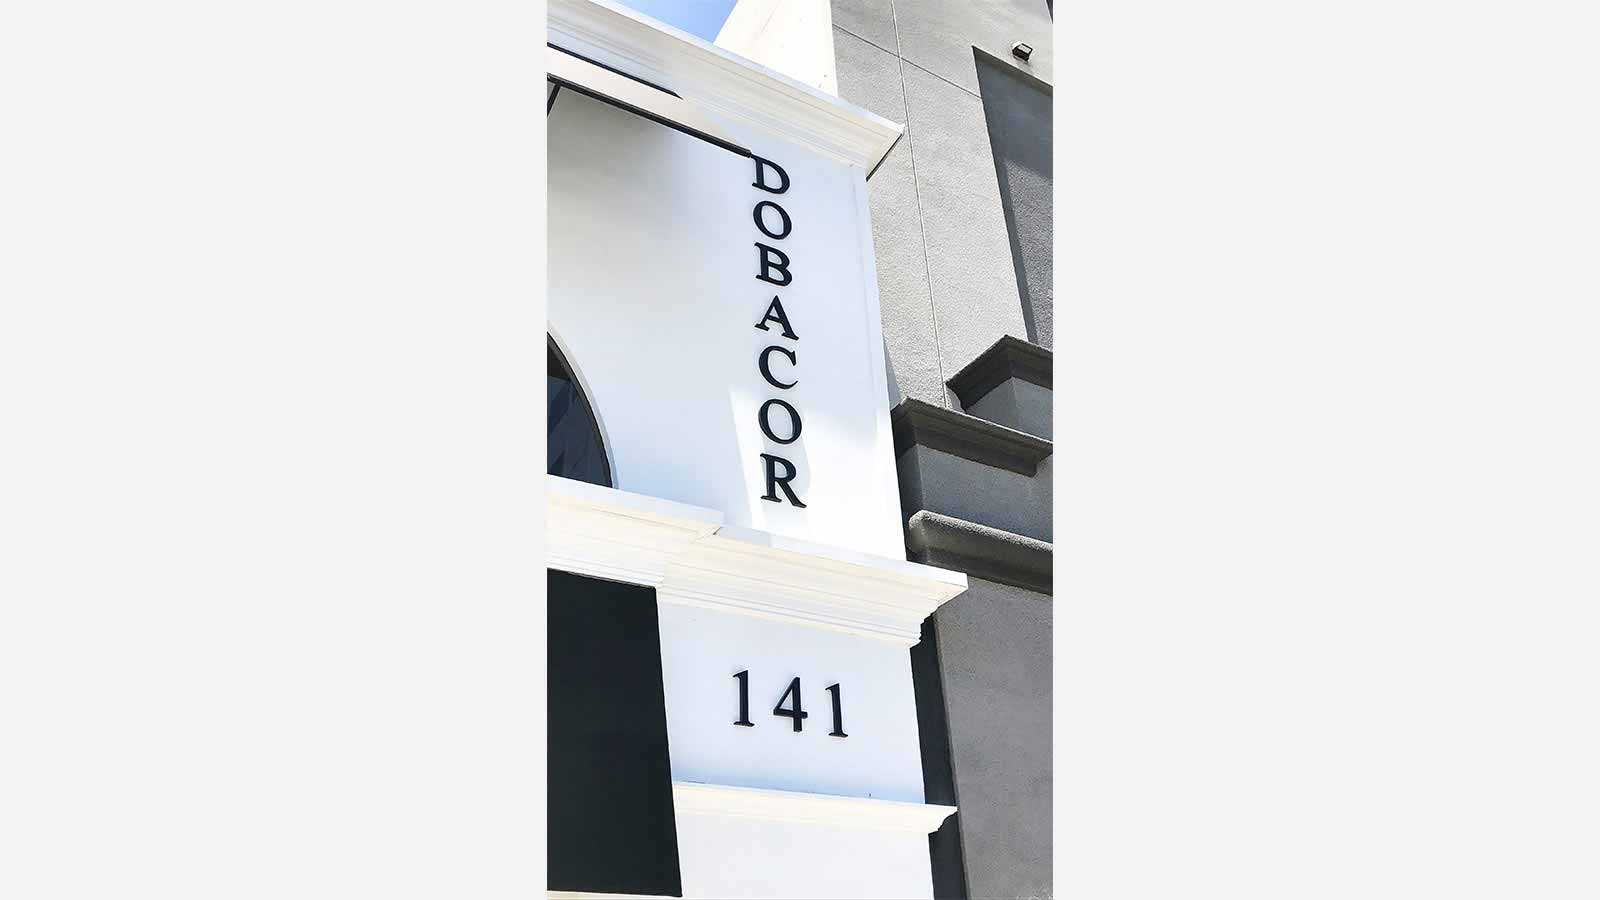 dobacor brand name and address signs